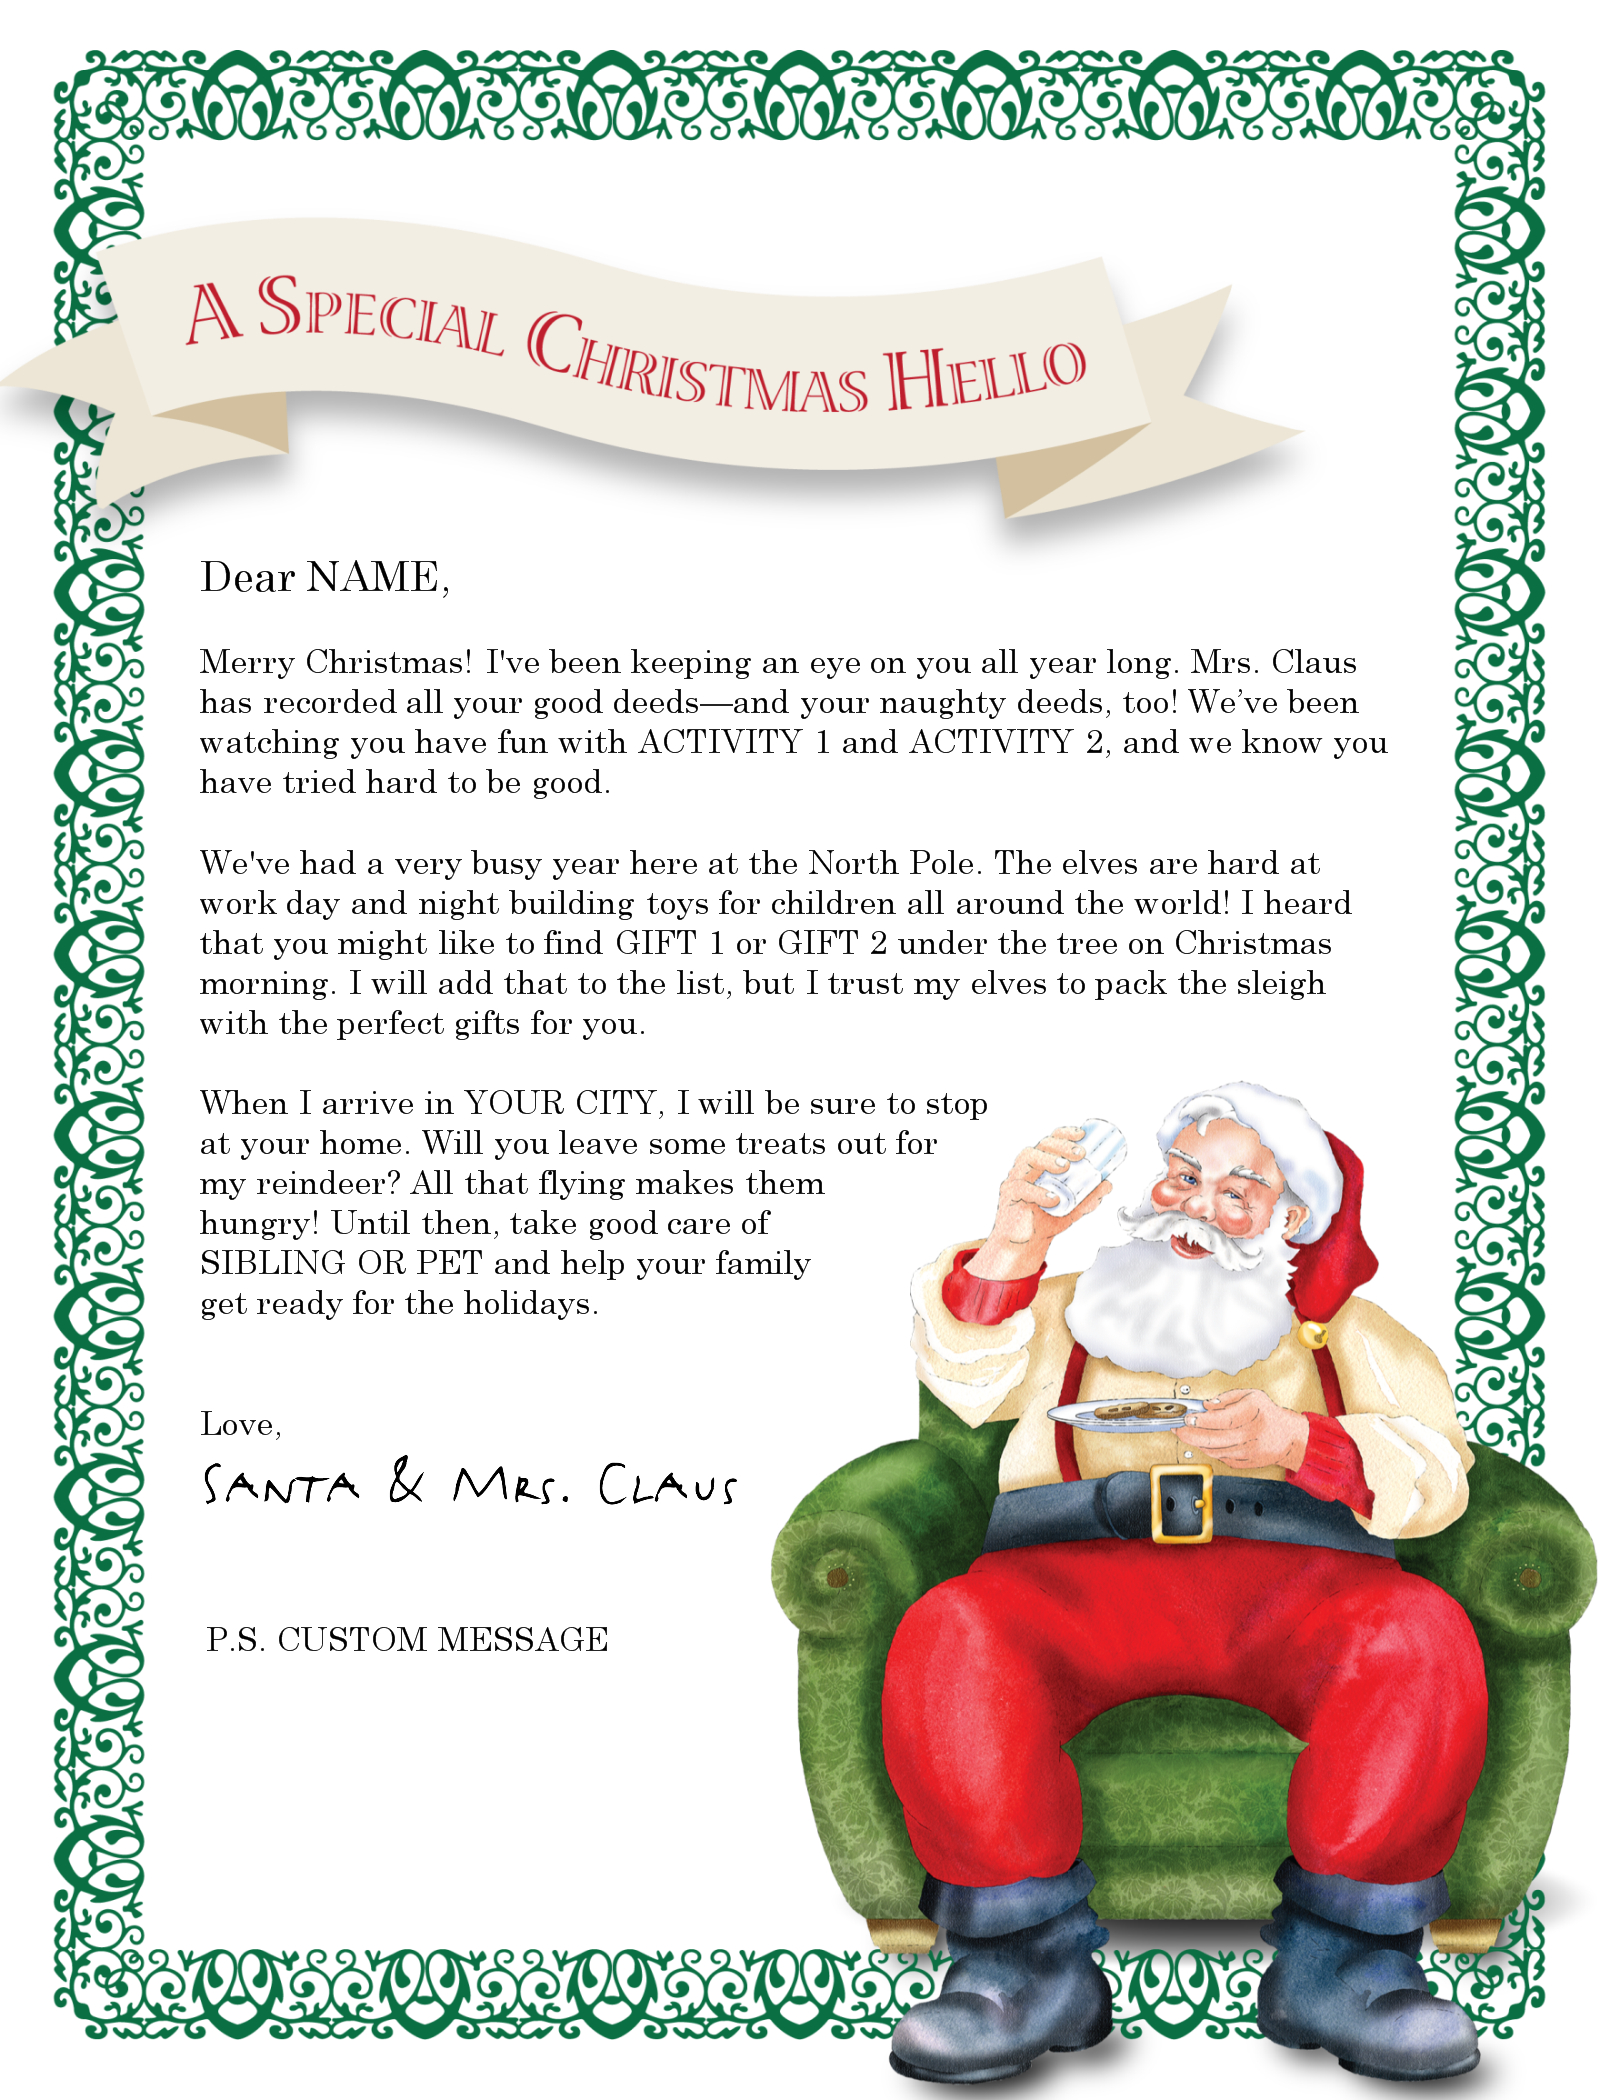 Letter From Santa Templates Free | Try It Free! Login Learn More - Free Personalized Printable Letters From Santa Claus